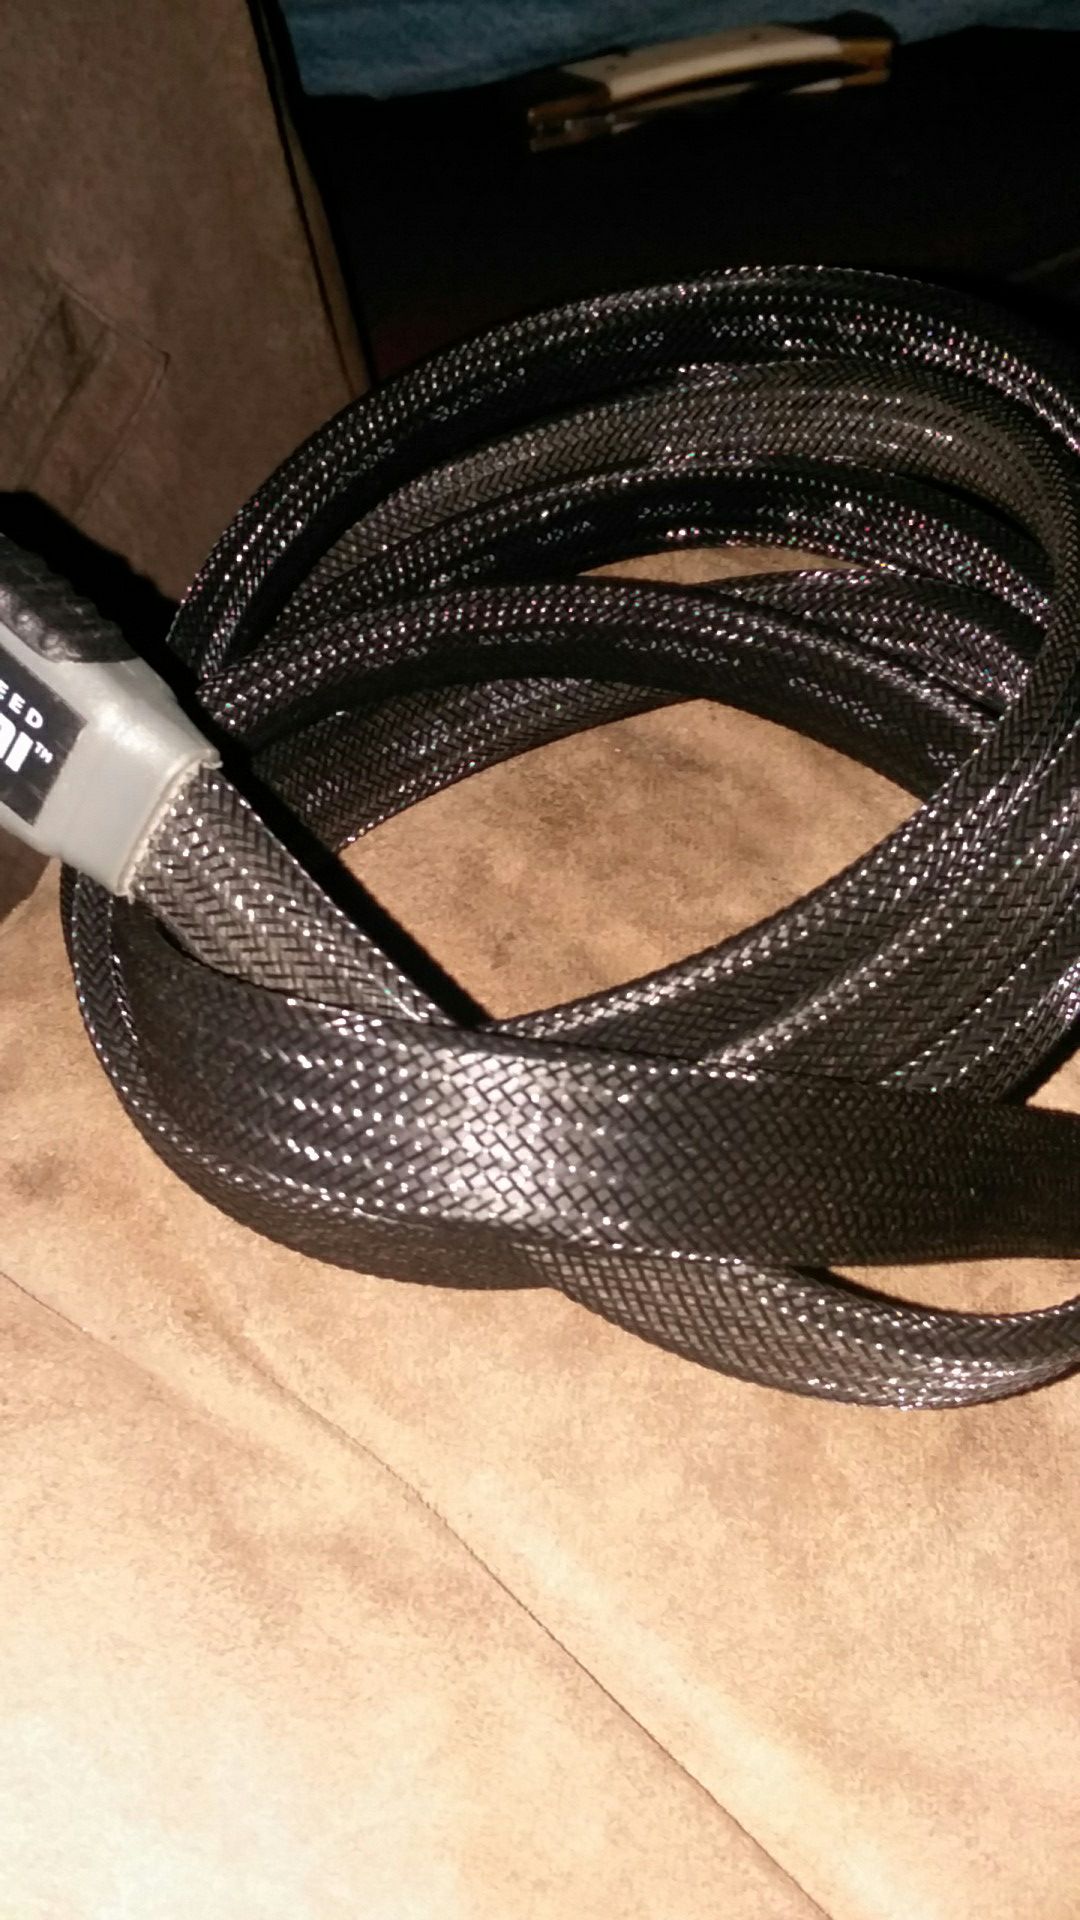 8 ft. High speed HDMI OMNIMOUNT EDITION CABLE